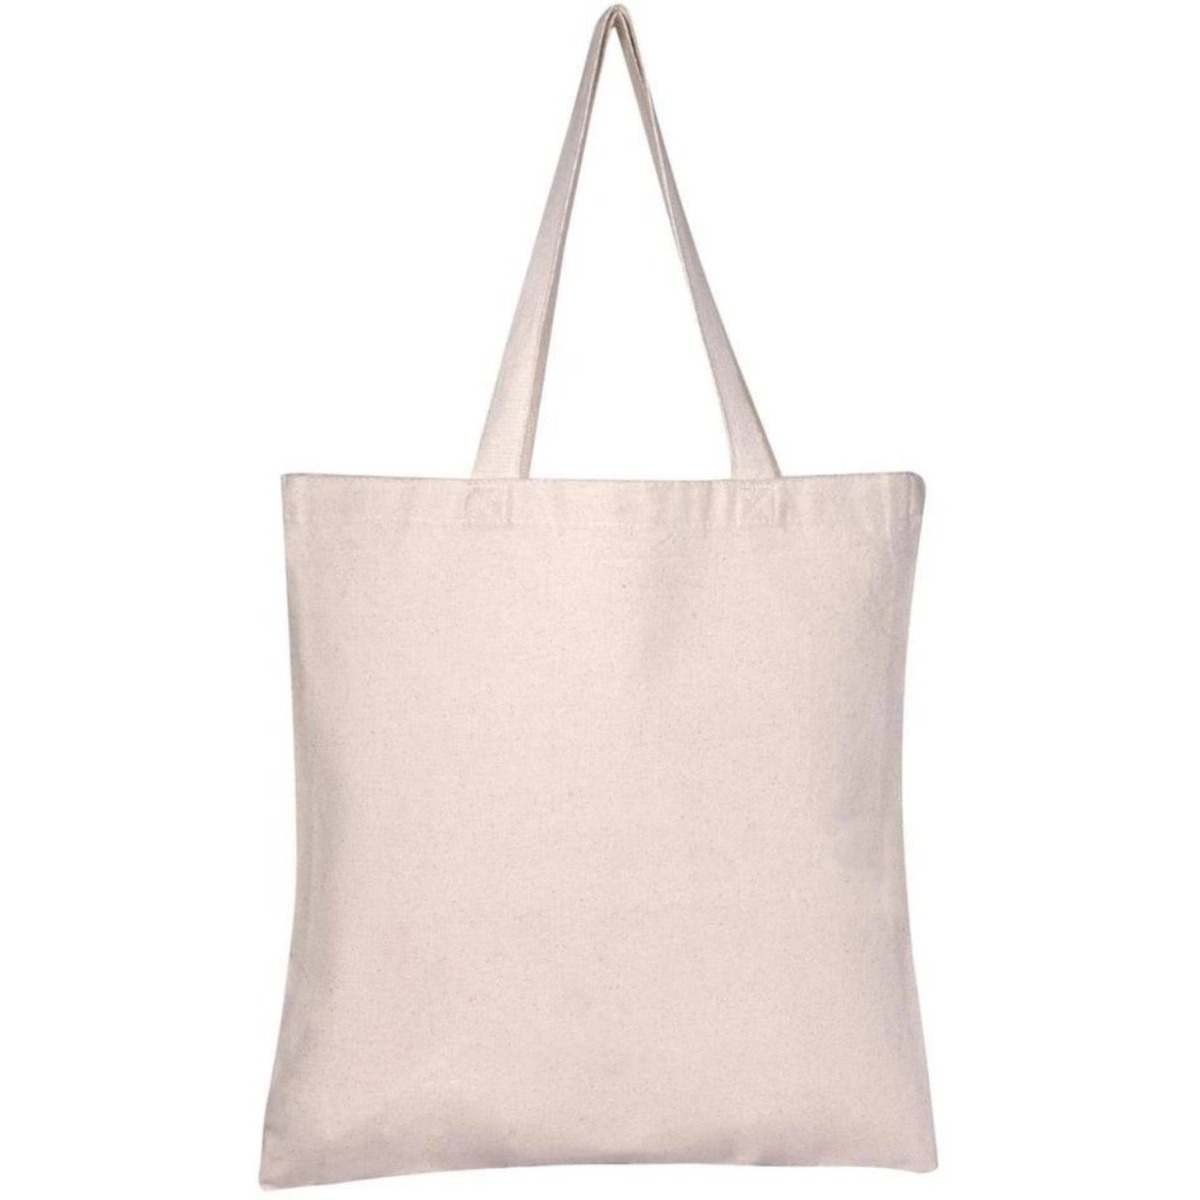  Sturdy Blank Canvas Tote Bags in Bulk - 12 Pack - Customizable  Canvas Bags Wholesale for Printing, Embroidery, Heat Transfer, Paint and  More! : Home & Kitchen